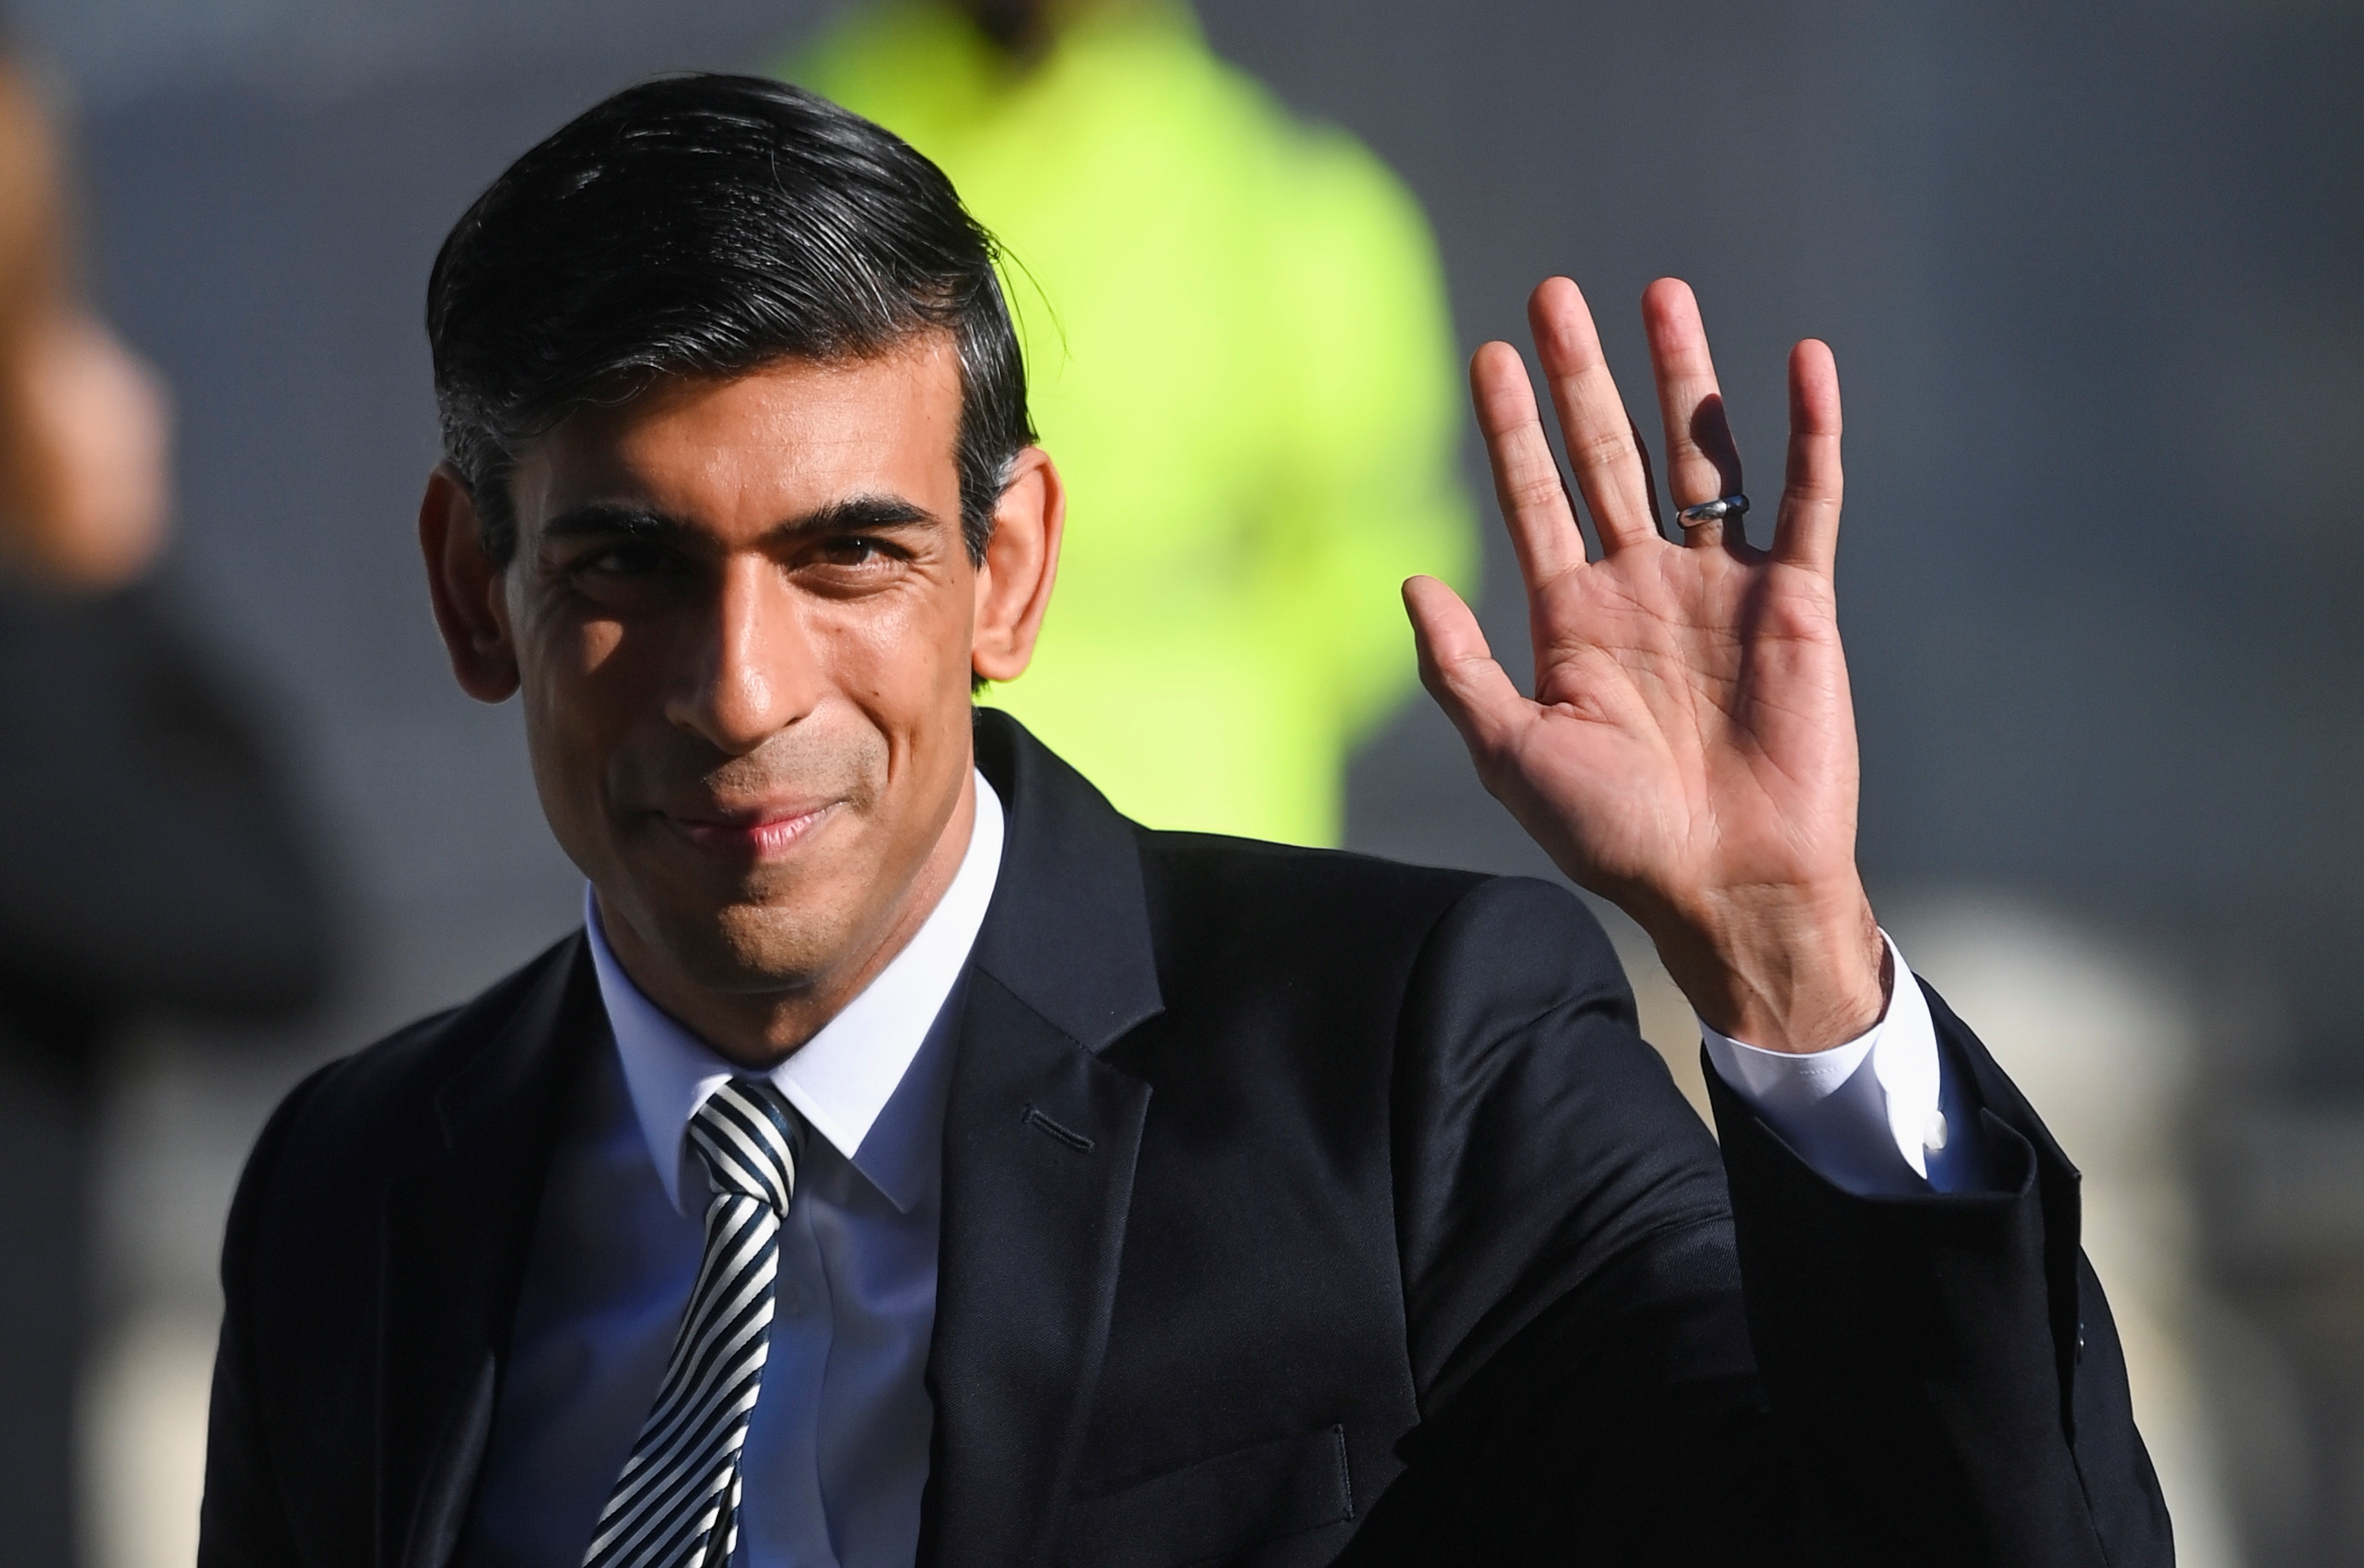 Britain's Chancellor of the Exchequer Rishi Sunak waves as he arrives to attend the annual Conservative Party Conference, in Manchester, Britain, October 6, 2021. REUTERS/Toby Melville/Files